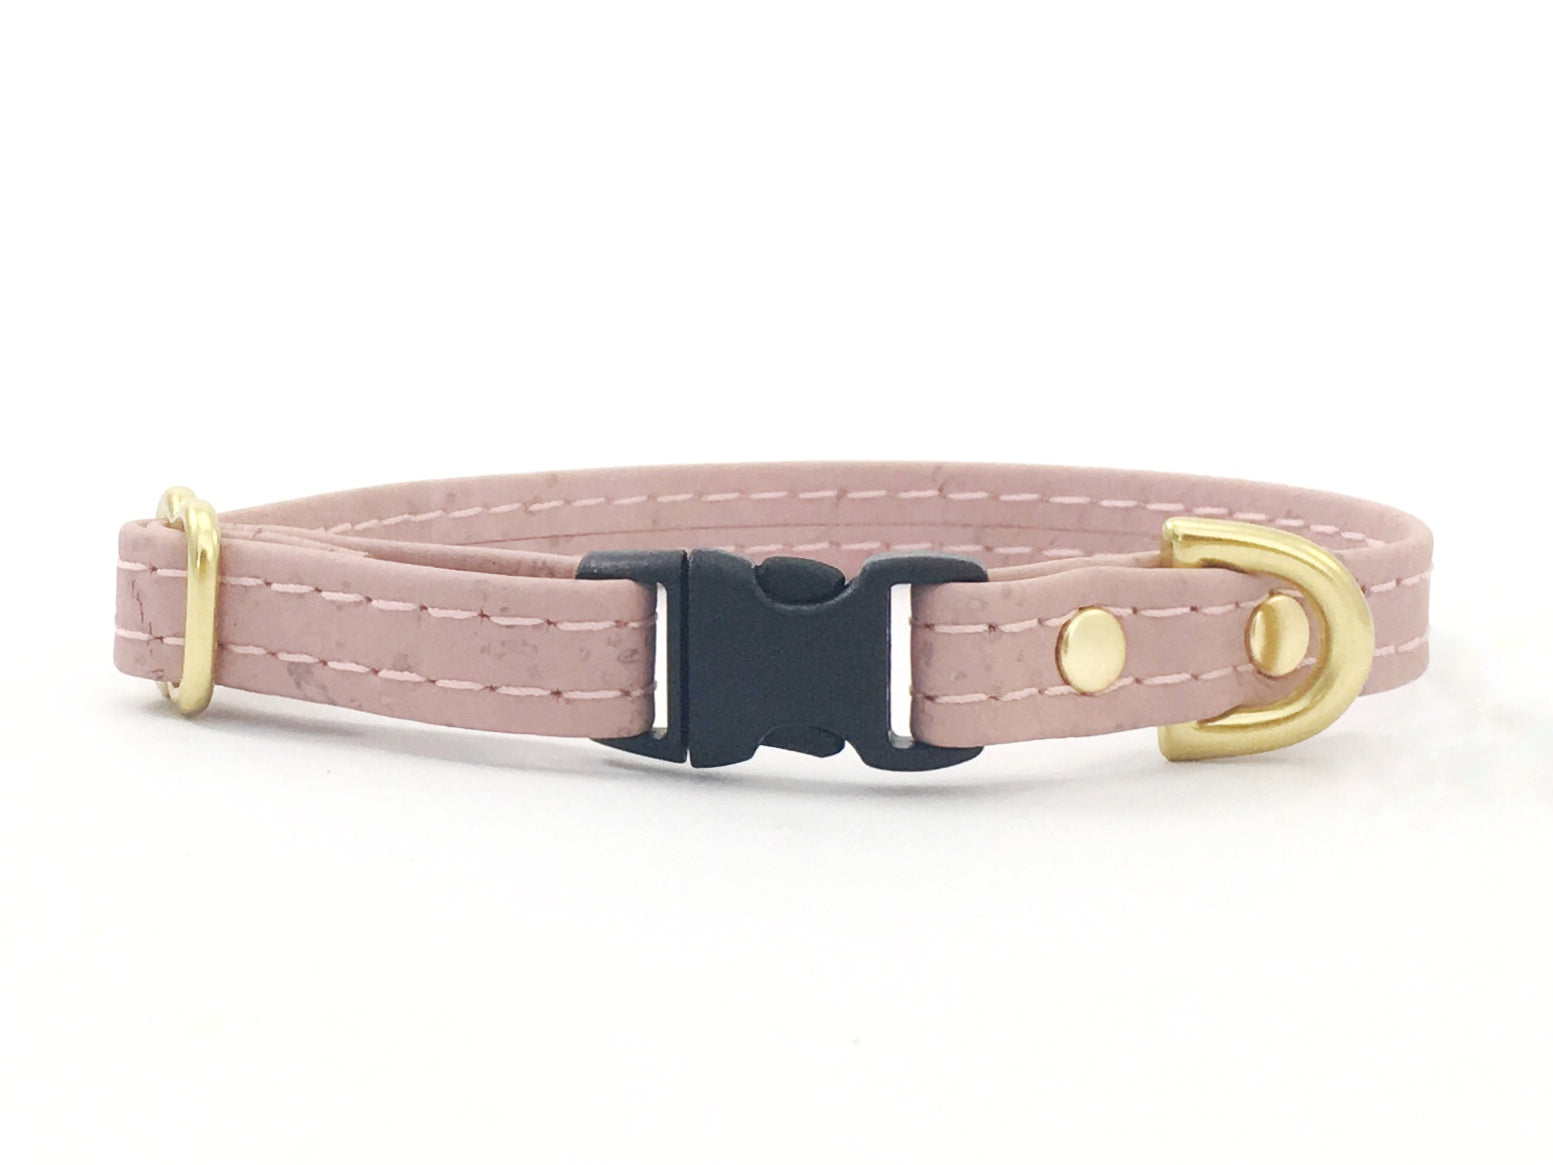 Small pink dog collar suitable for Chihuahuas, Miniature Dachshunds, Pomeranians and Maltese